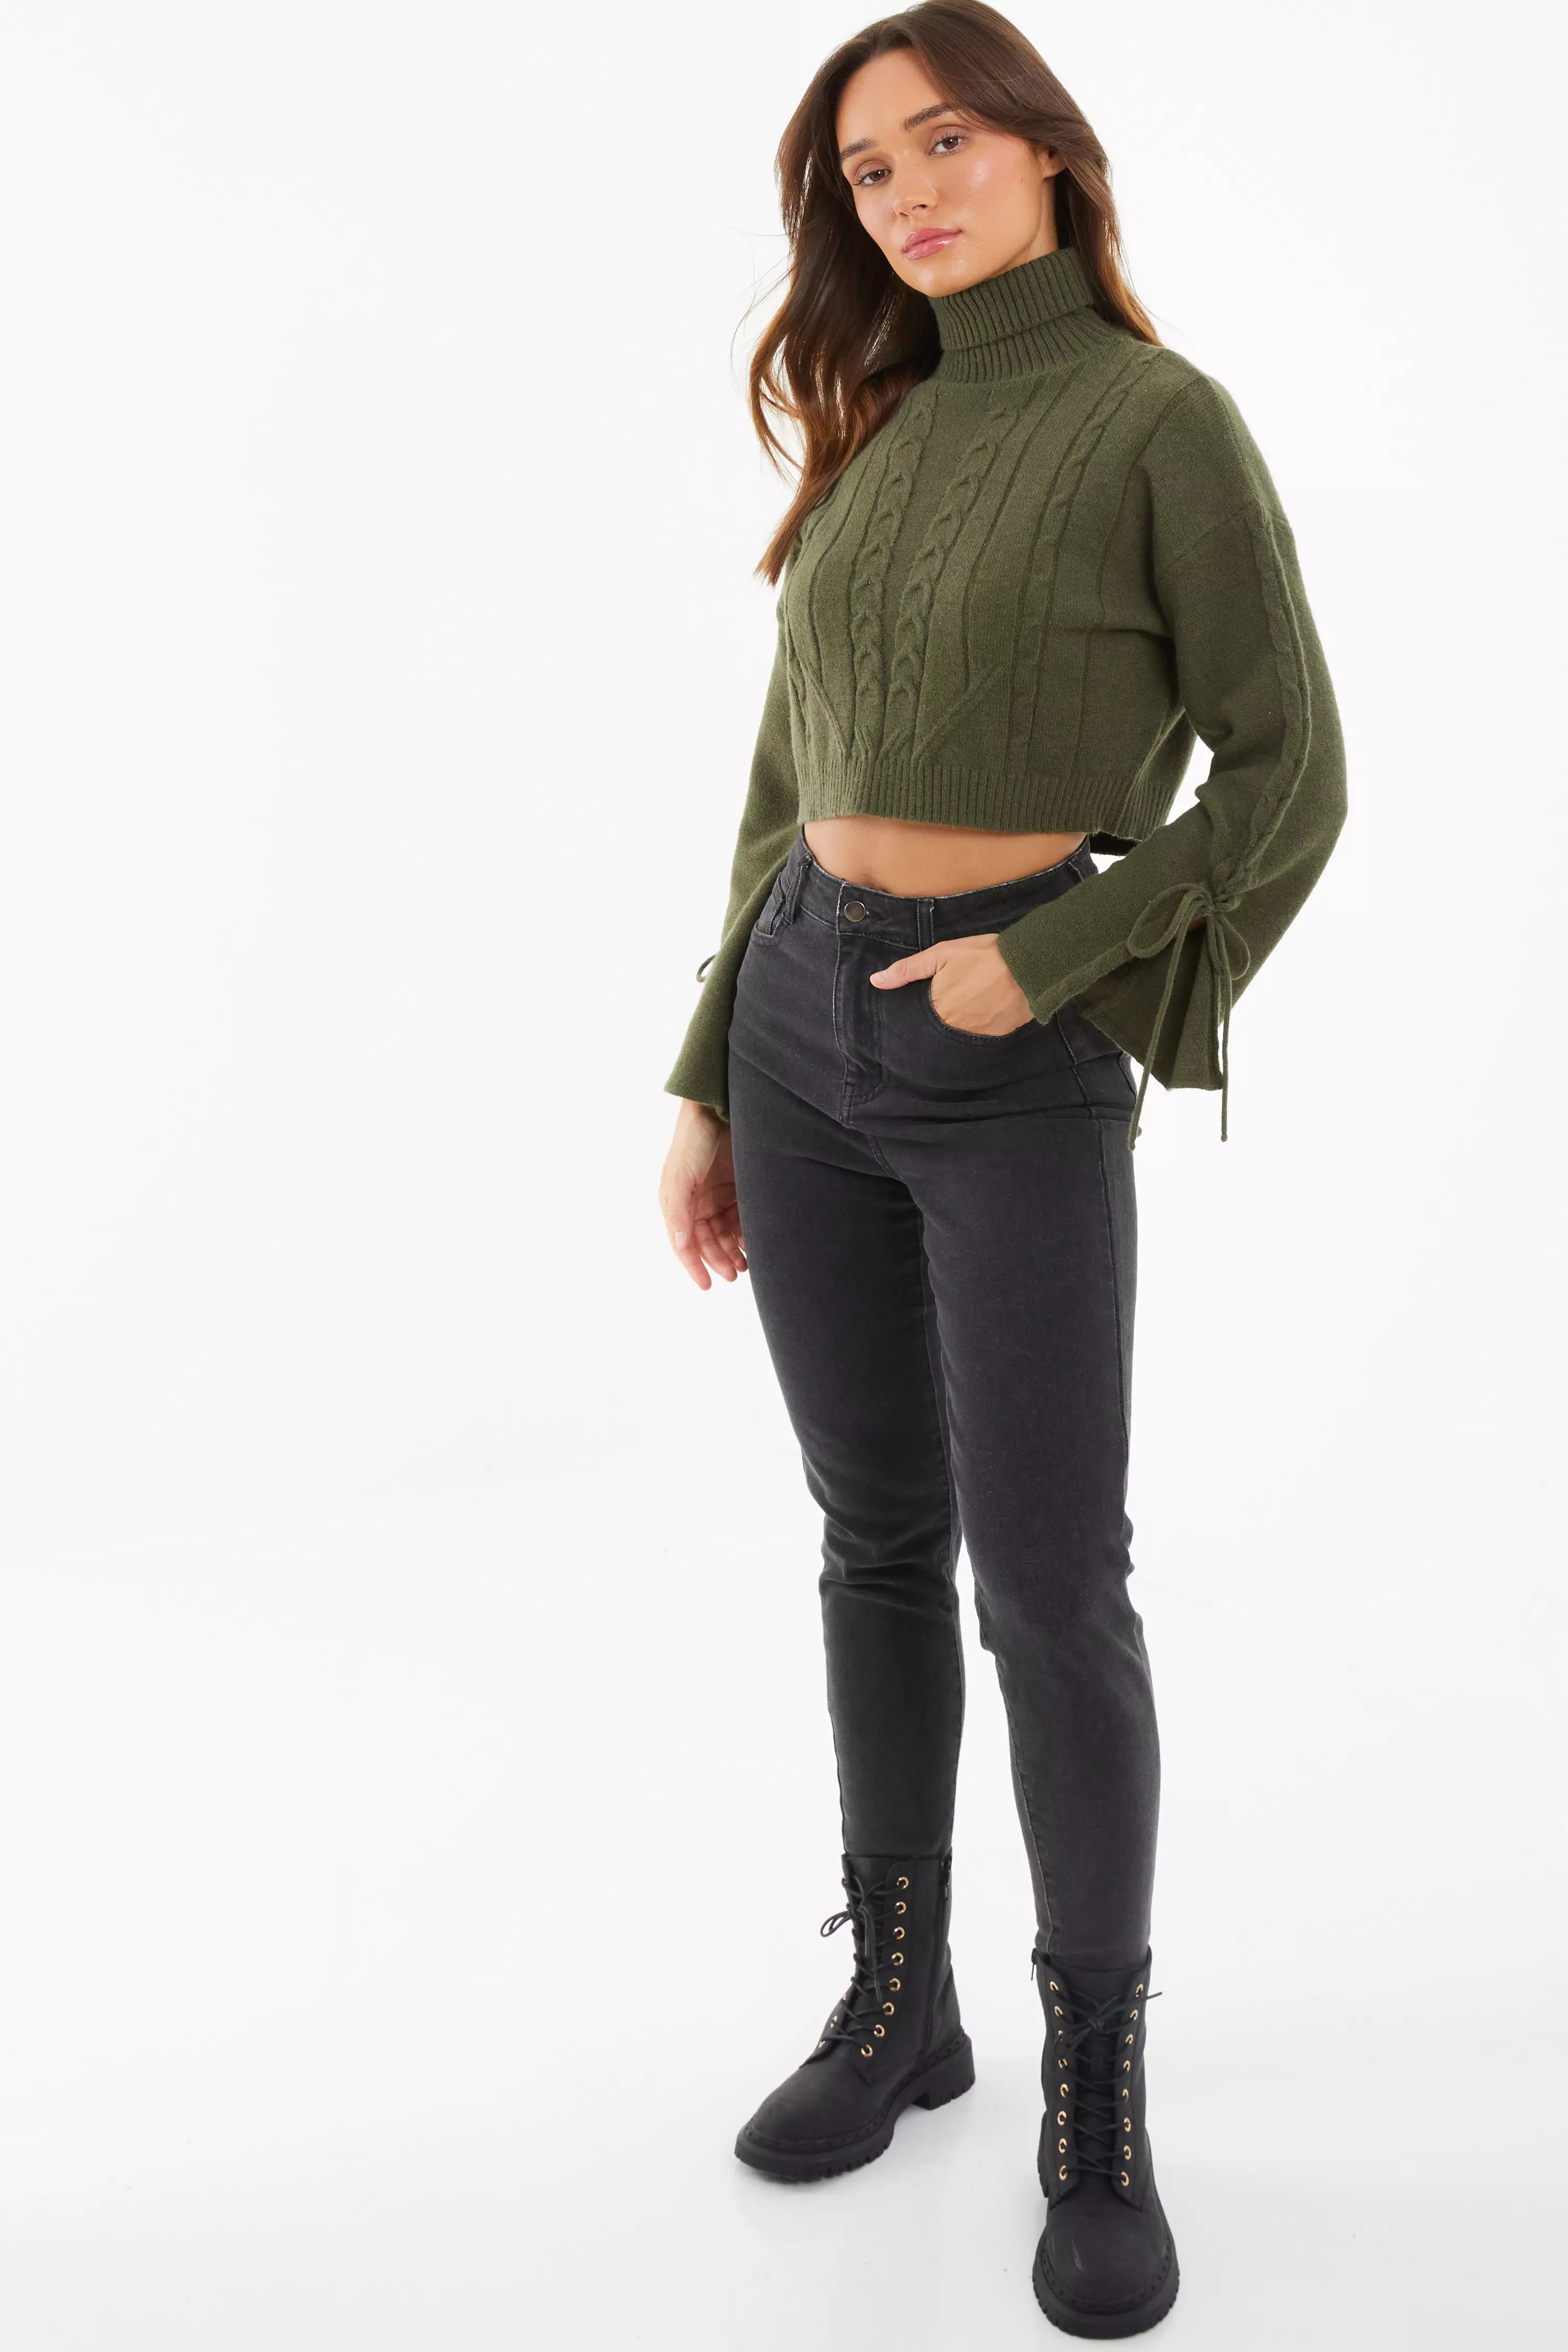 Khaki Knitted Lace Up Sleeve Jumper